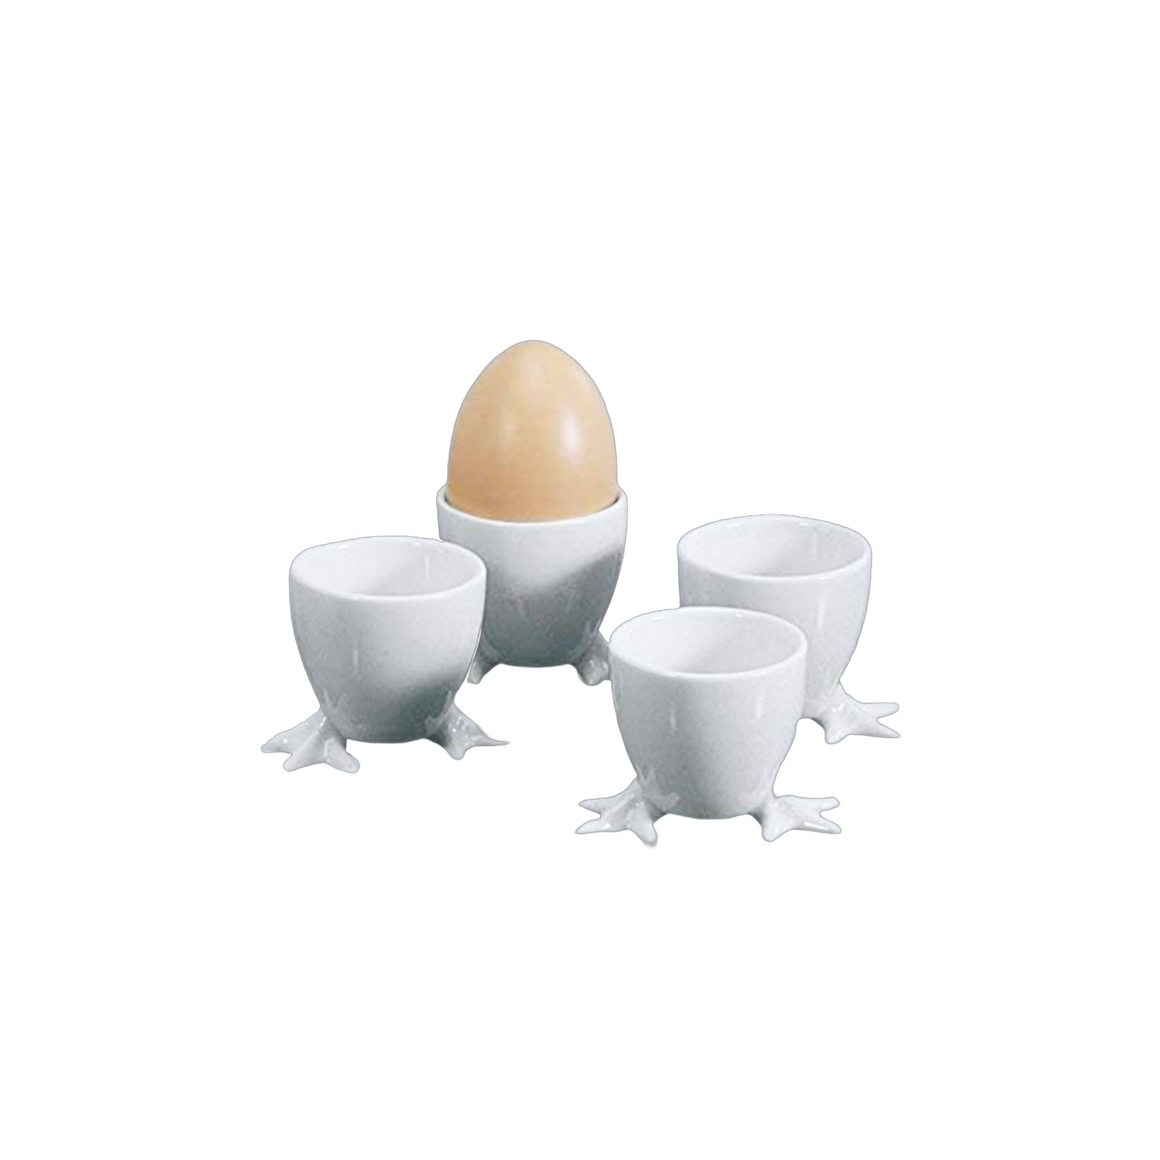 White Porcelain Egg Cups with Whimsical Chicken Feet, Set of 4